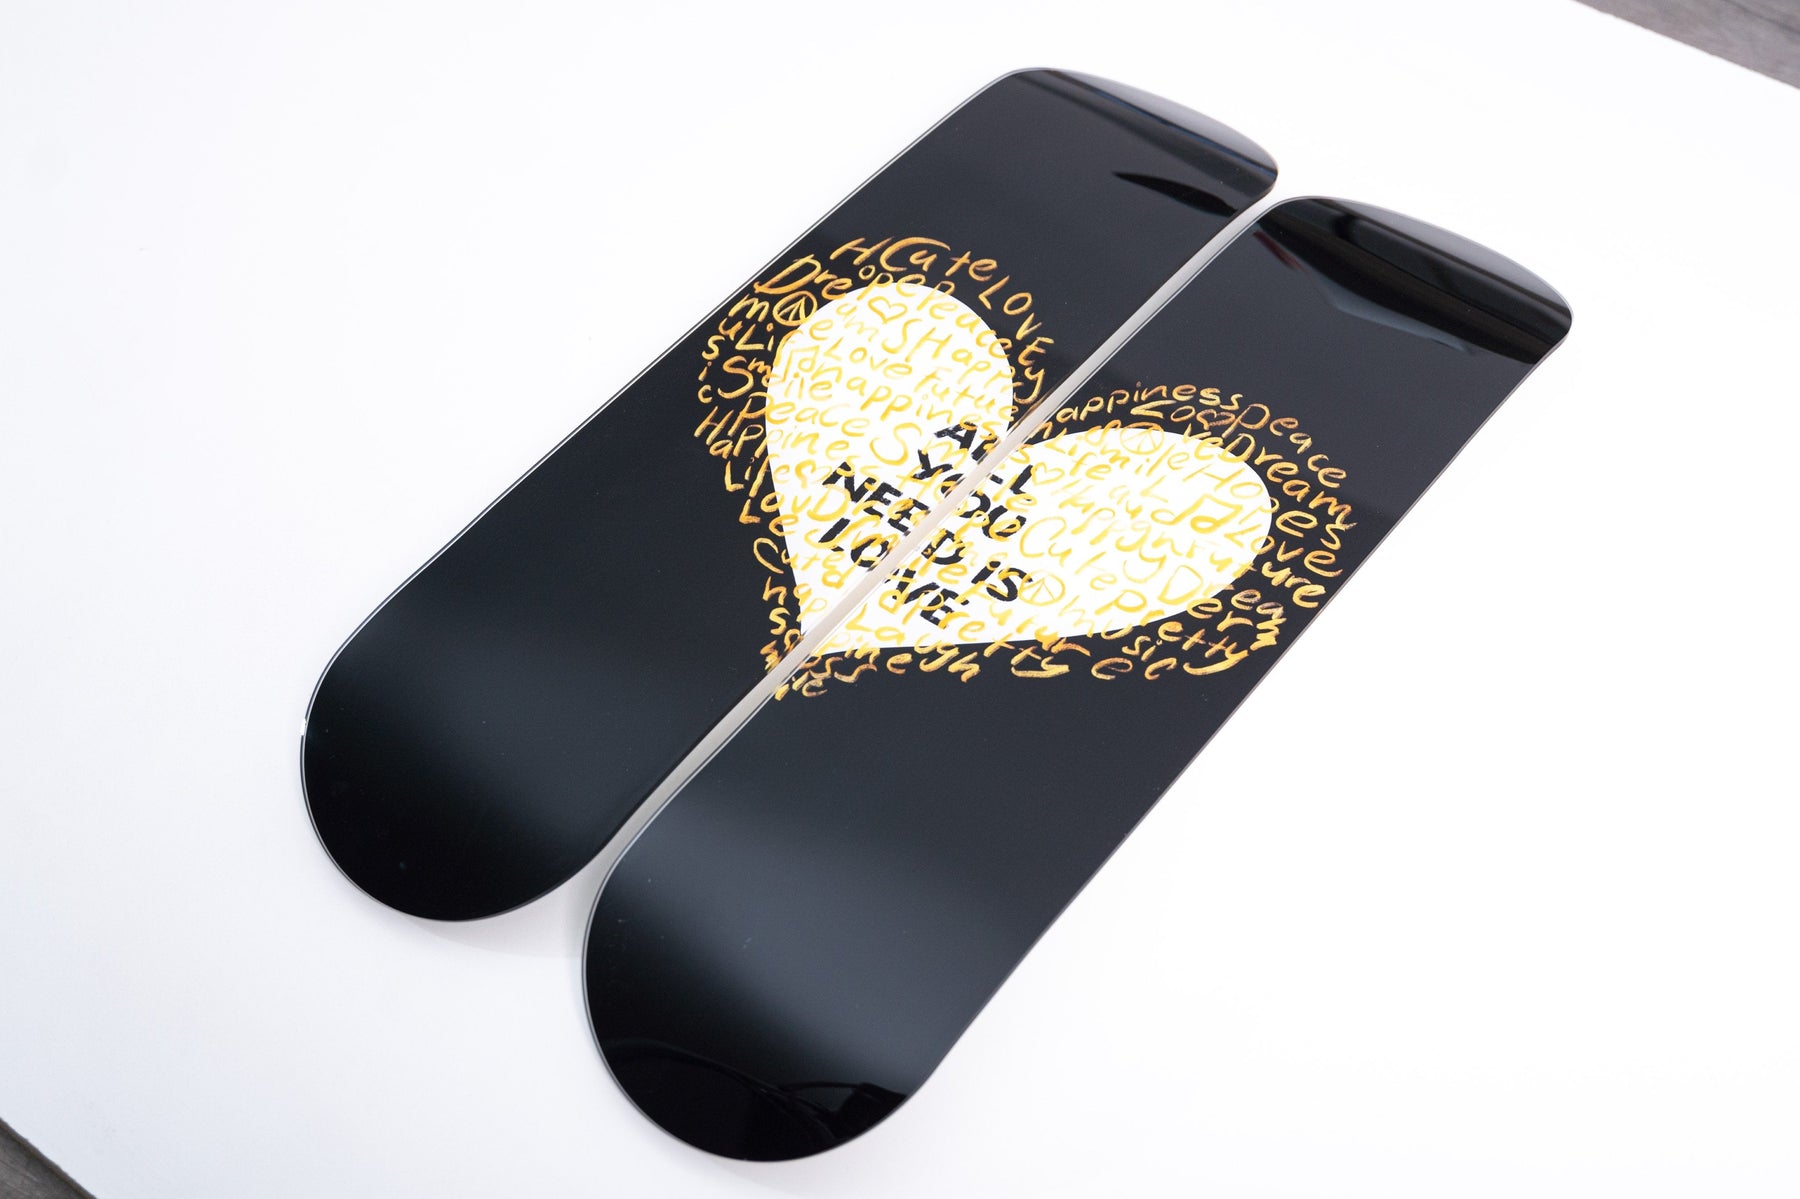 Pair Wall Art of All You Need Is Love Skateboard Design in Acrylic Glass - Positive Vibes